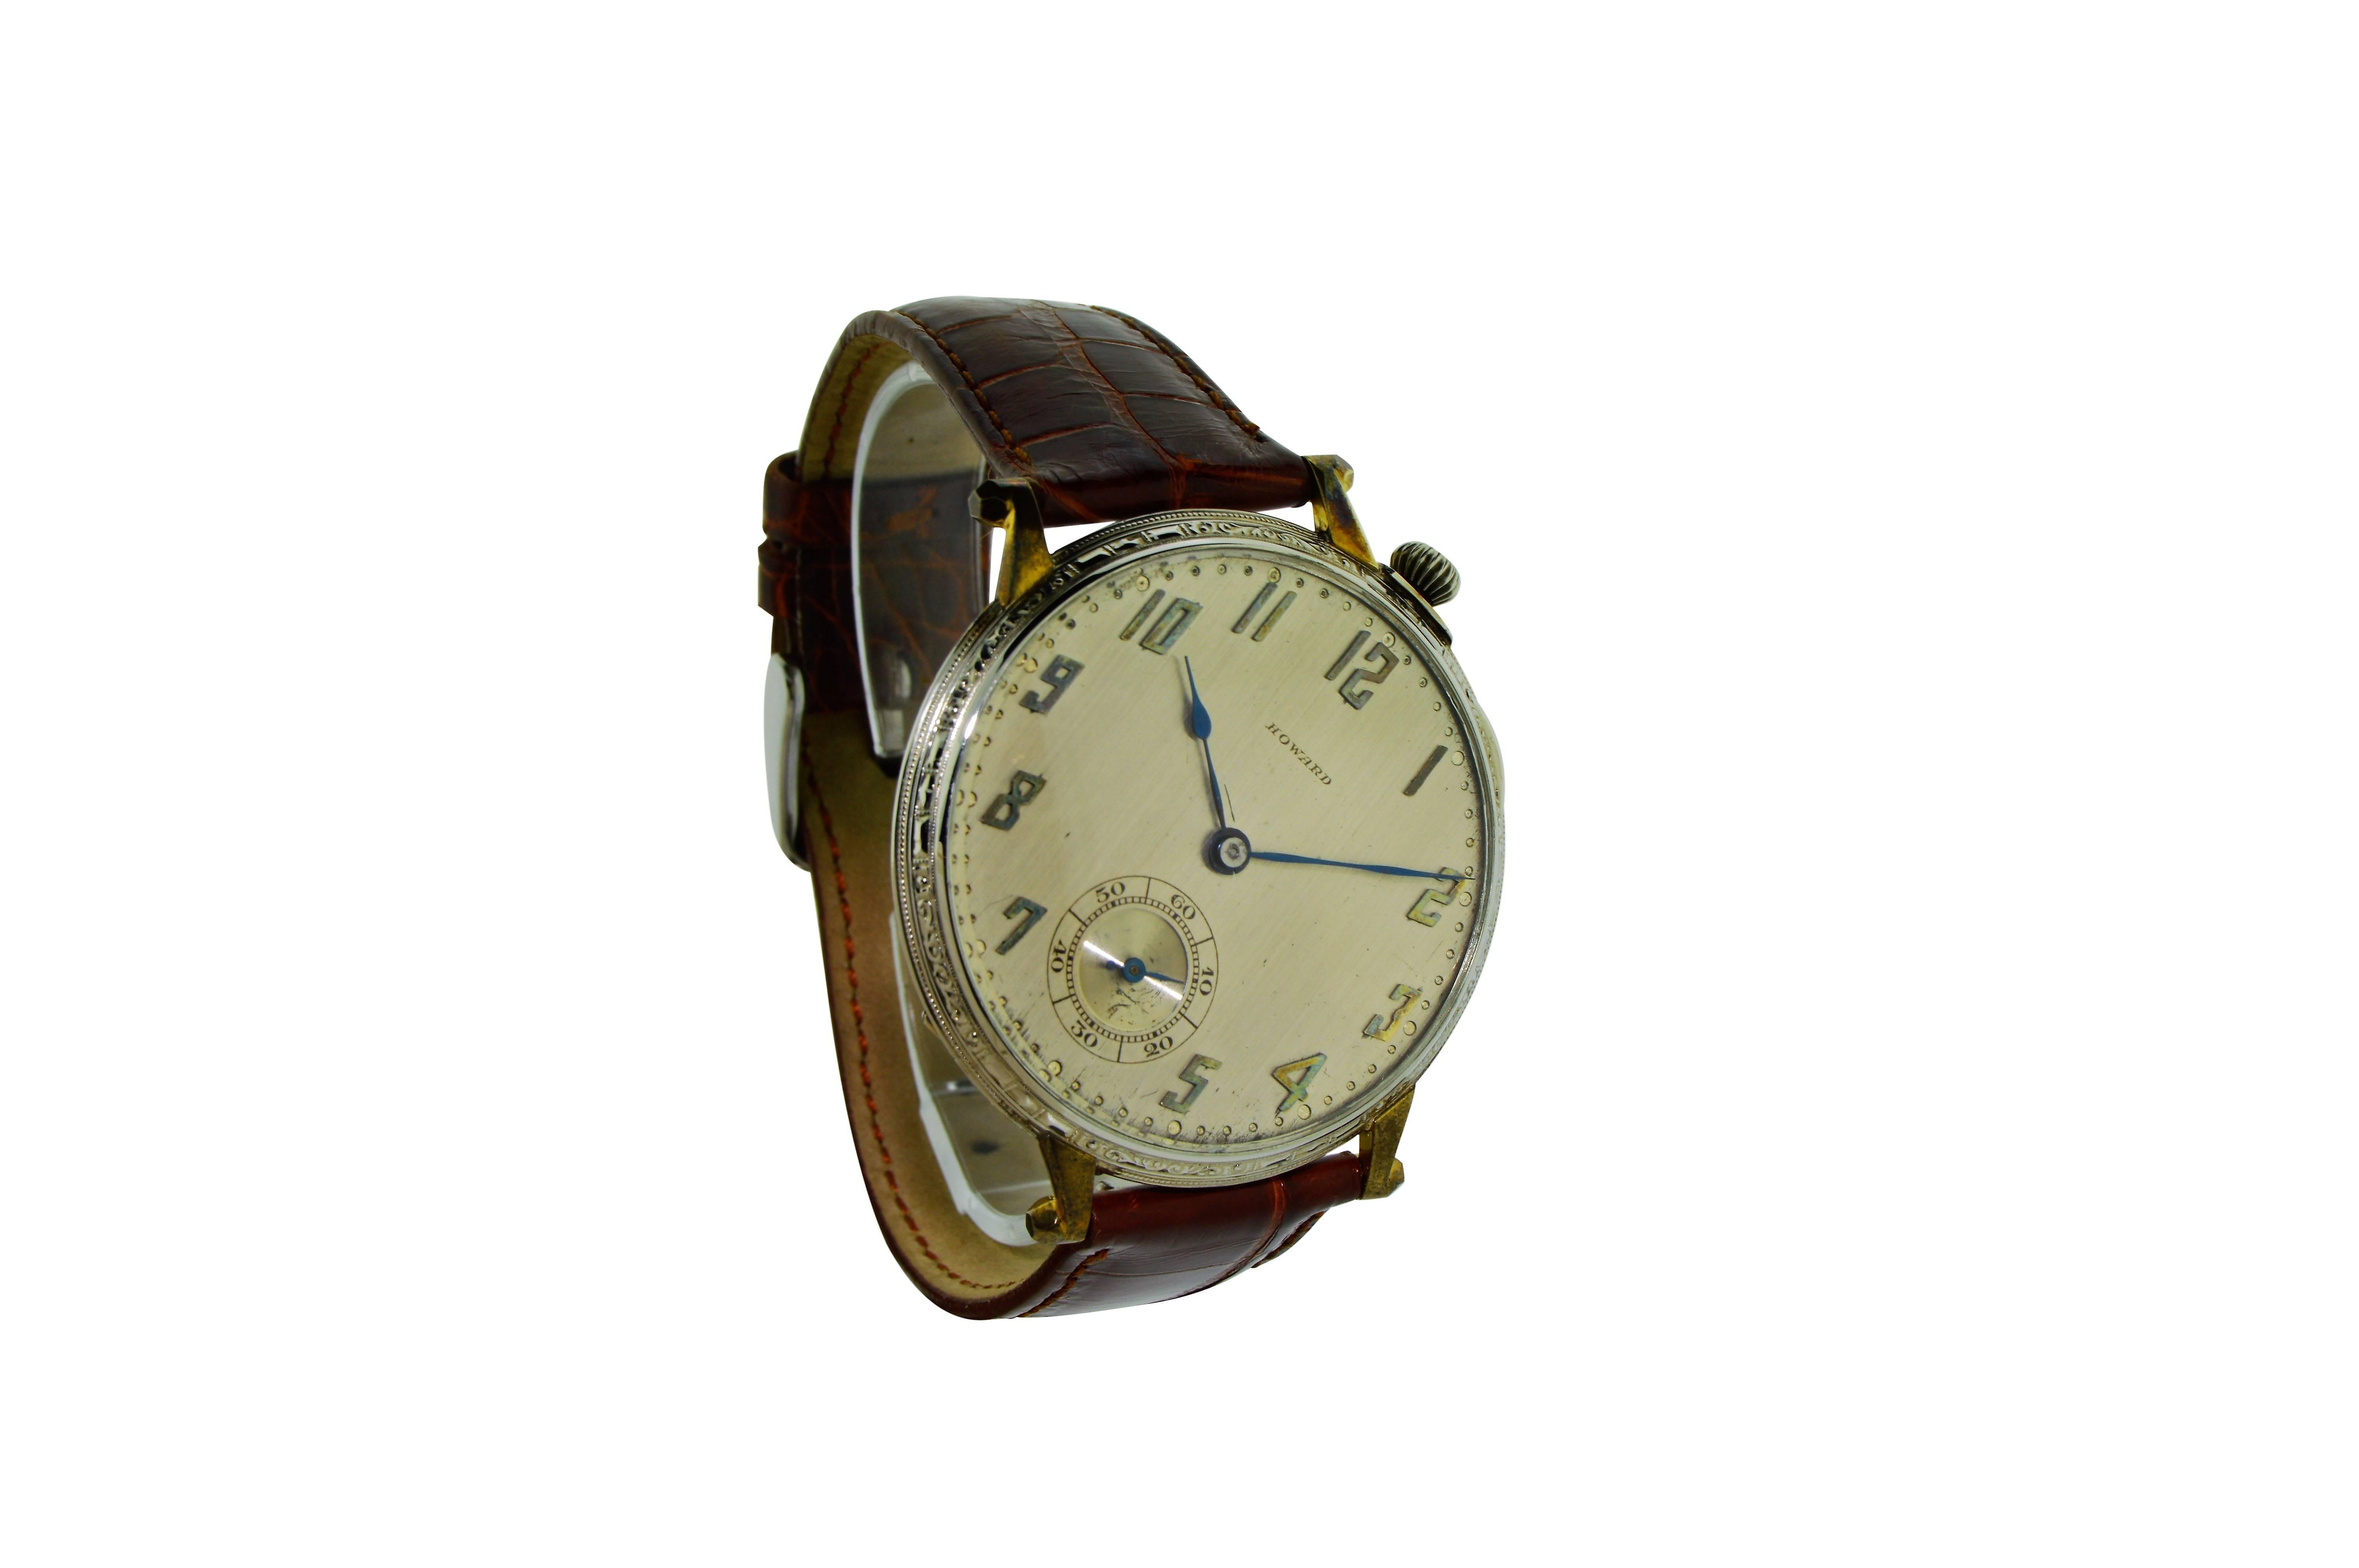 FACTORY / HOUSE: Howard Watch Company
STYLE / REFERENCE: Pocket Wrist Watch
METAL / MATERIAL: Heavy White Gold Filled
DIMENSIONS:  50mm  X  44mm
CIRCA: 1920's
MOVEMENT / CALIBER: 17 Jewels / Manual Winding
DIAL / HANDS: Original Applied Arabic /